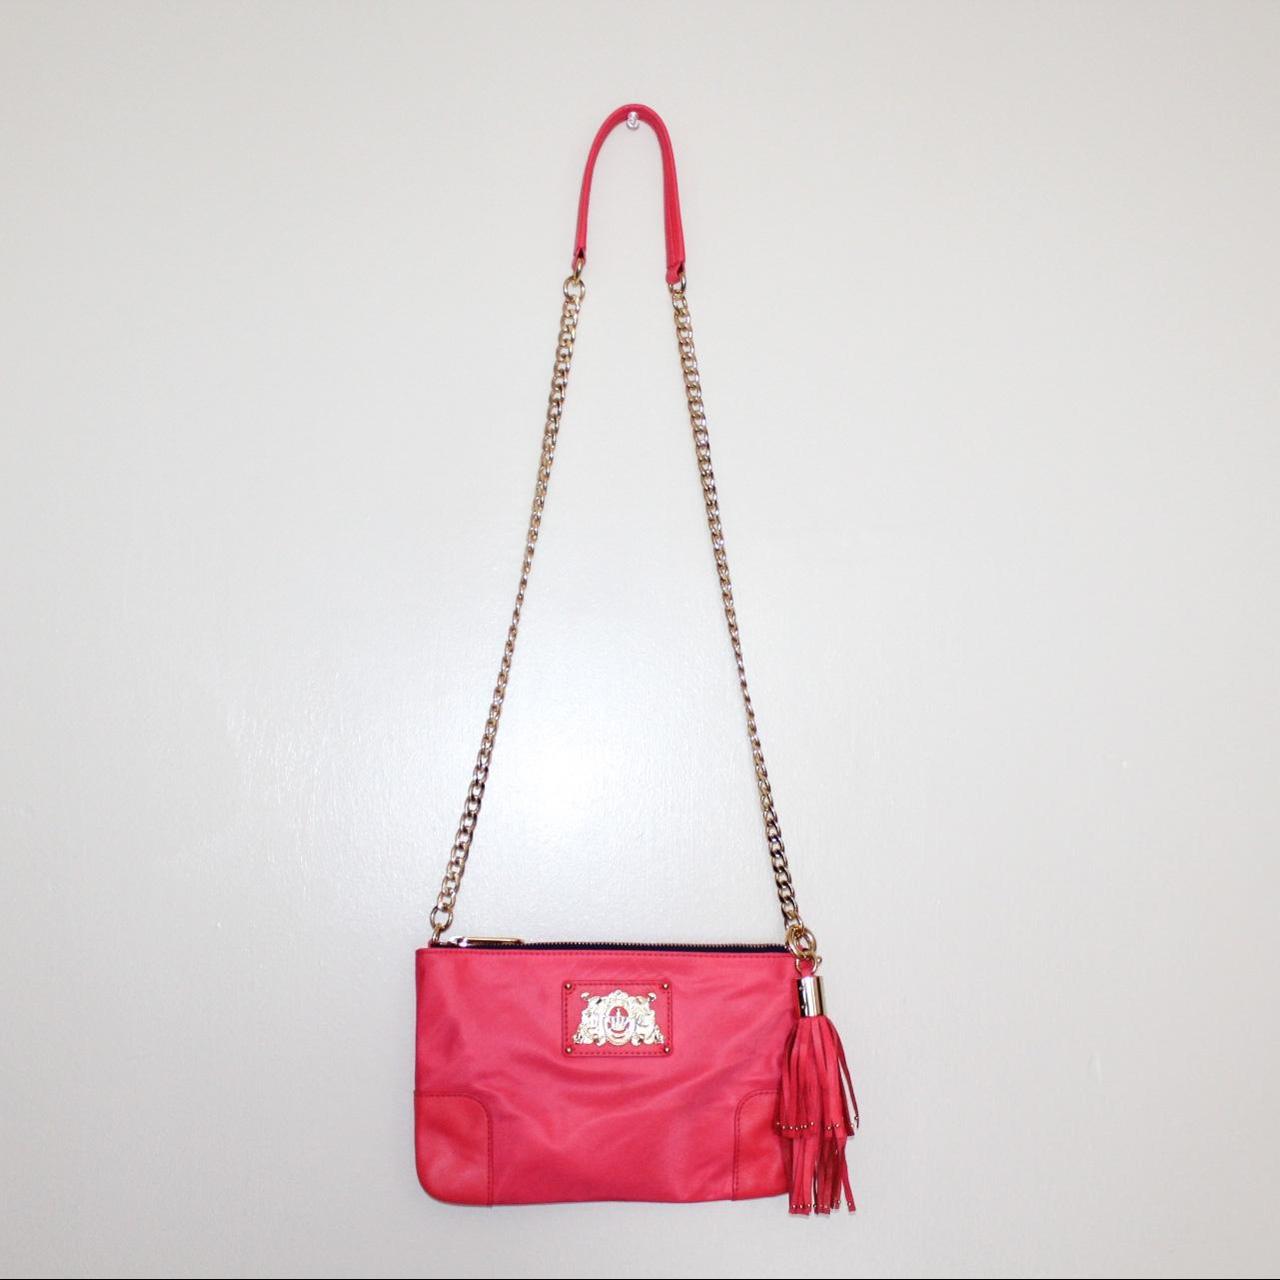 Rare Juicy Couture Purse | Juicy couture bags, Juicy couture purse, Juicy  couture handbags